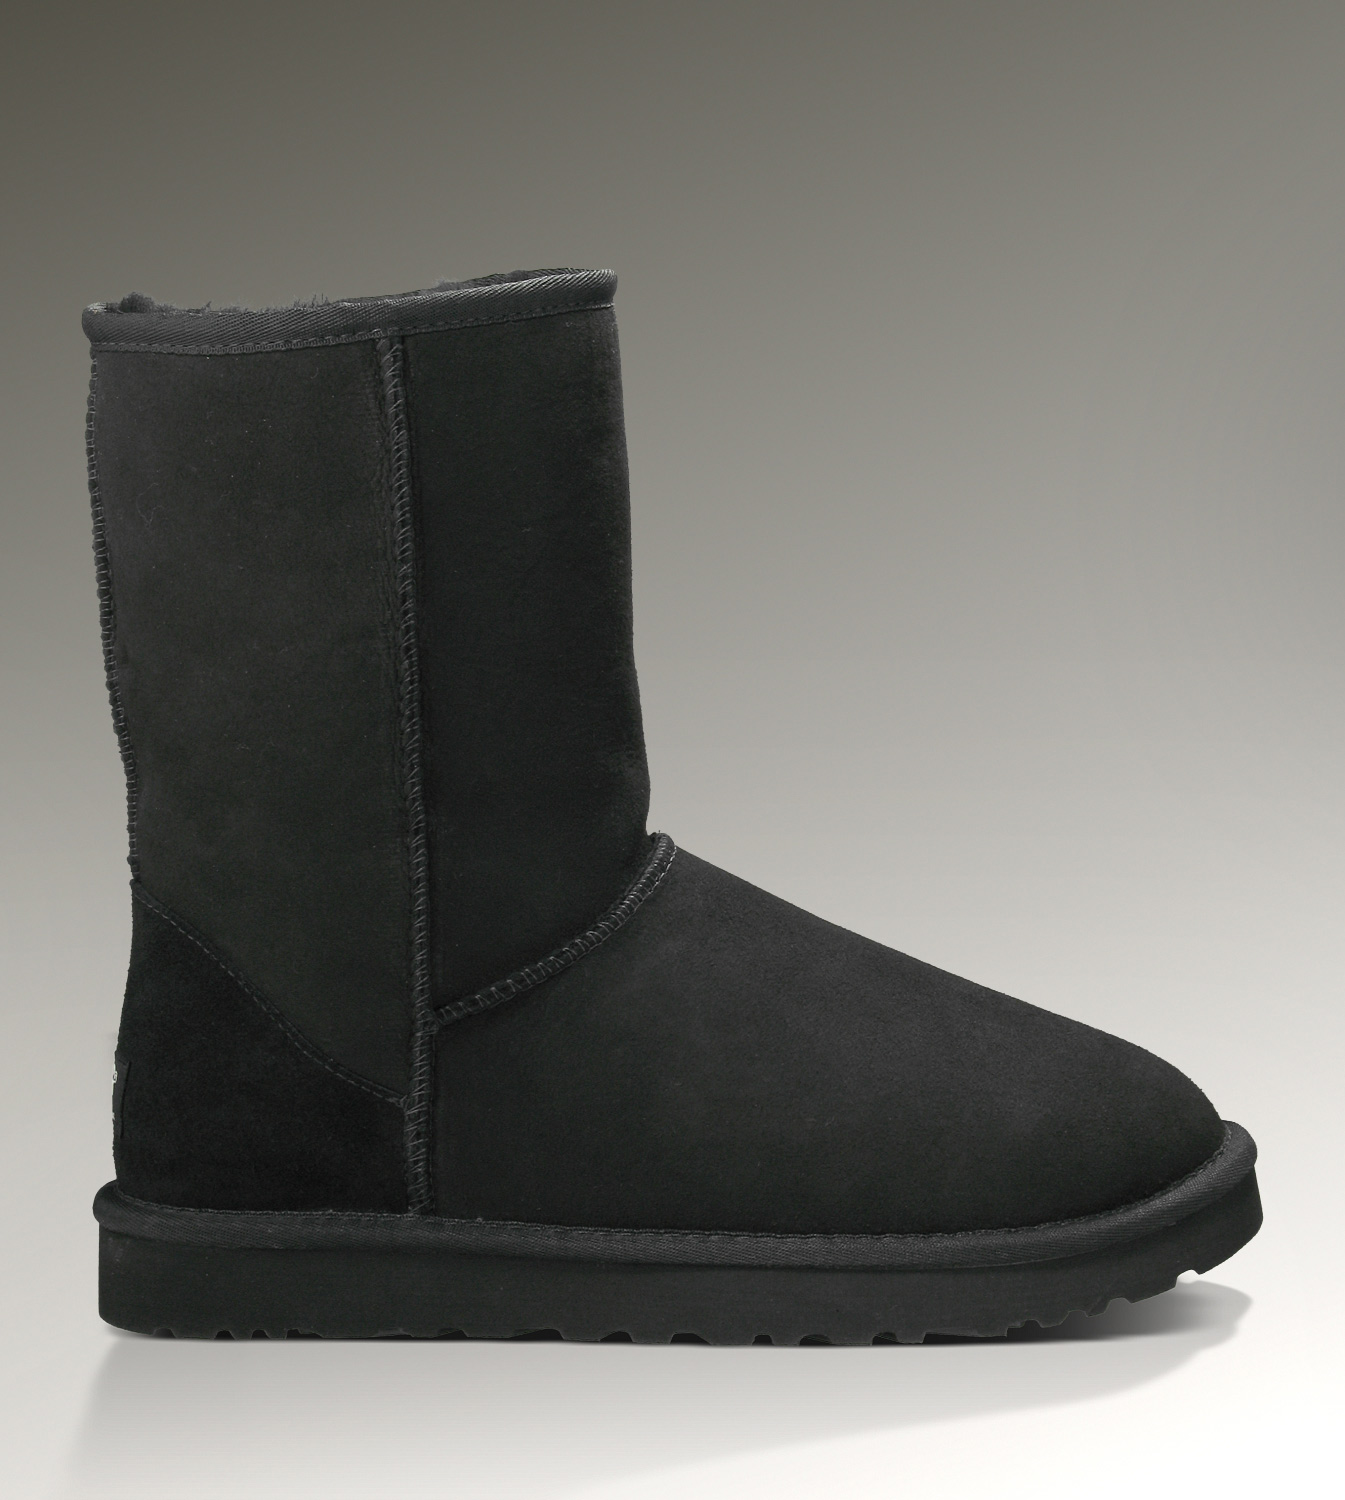 Ugg Outlet Classic Short Black Boots 079268